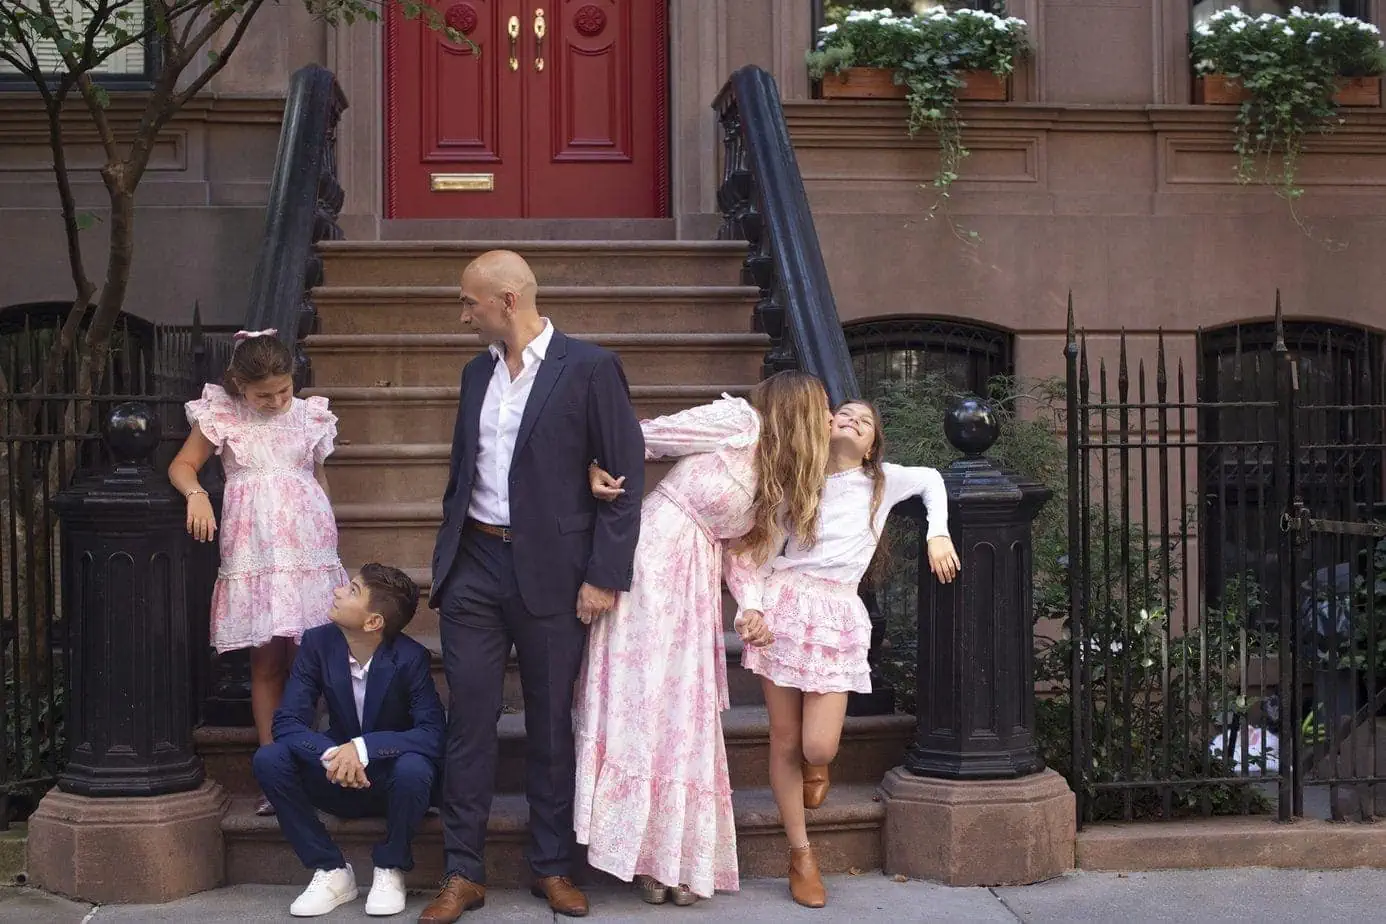 Family photoshoot outside of NYC brownstone in matching outfits